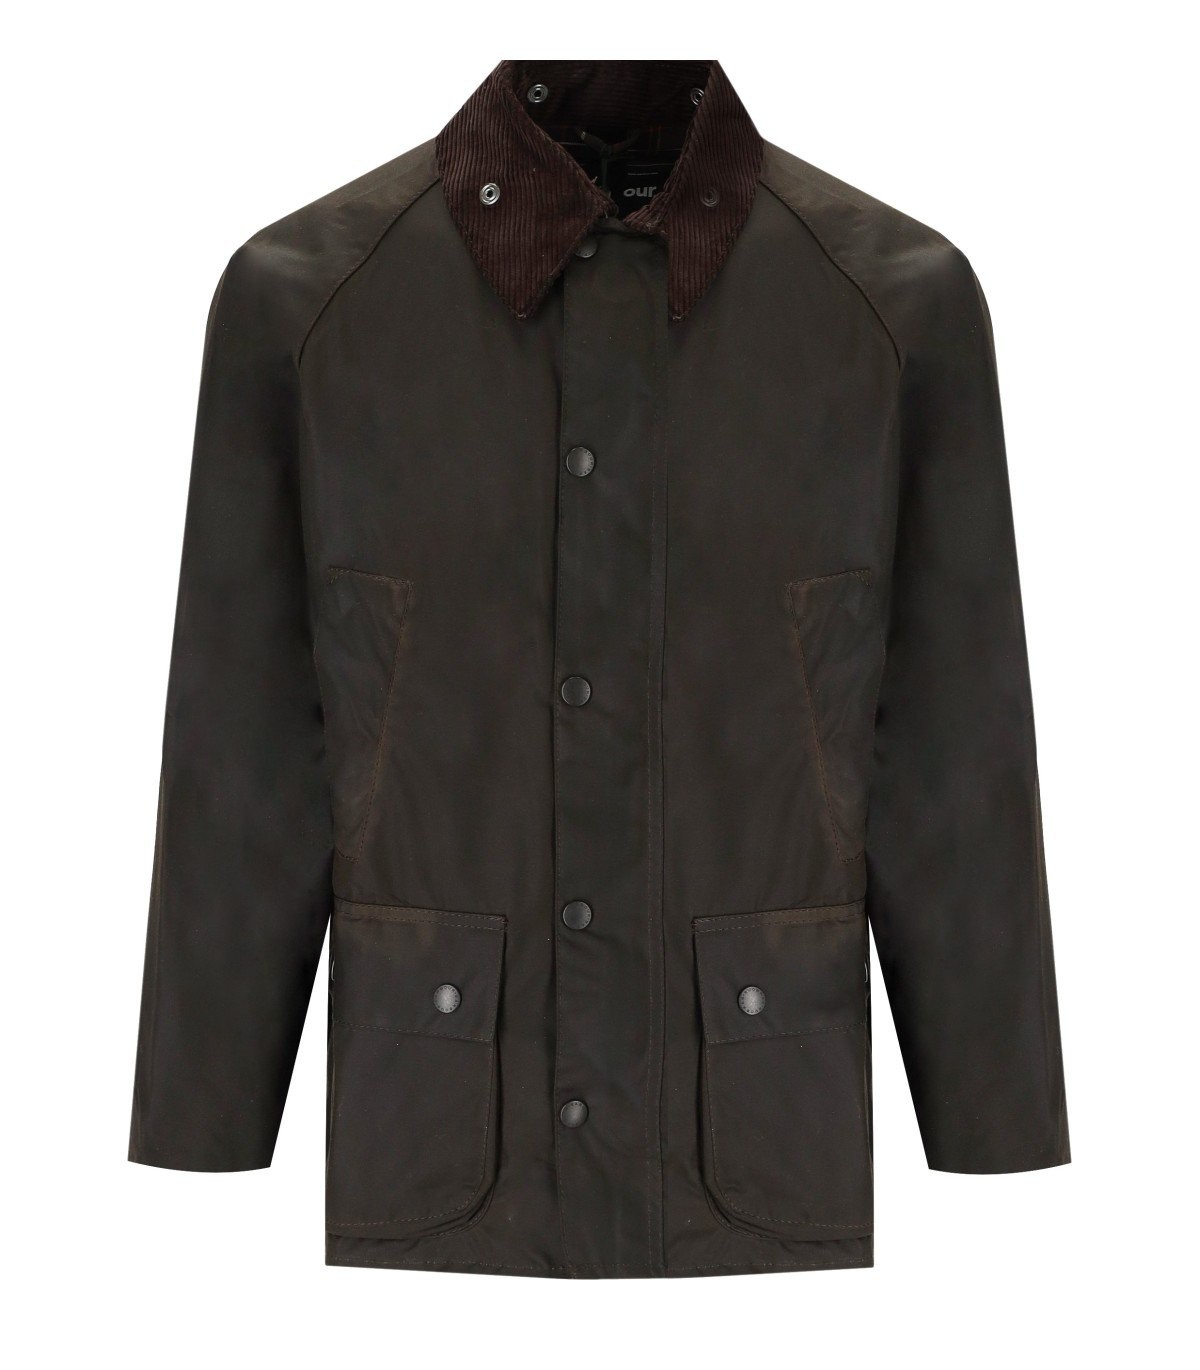 BARBOUR CLASSIC BEDALE WAX OLIVE GREEN JACKET